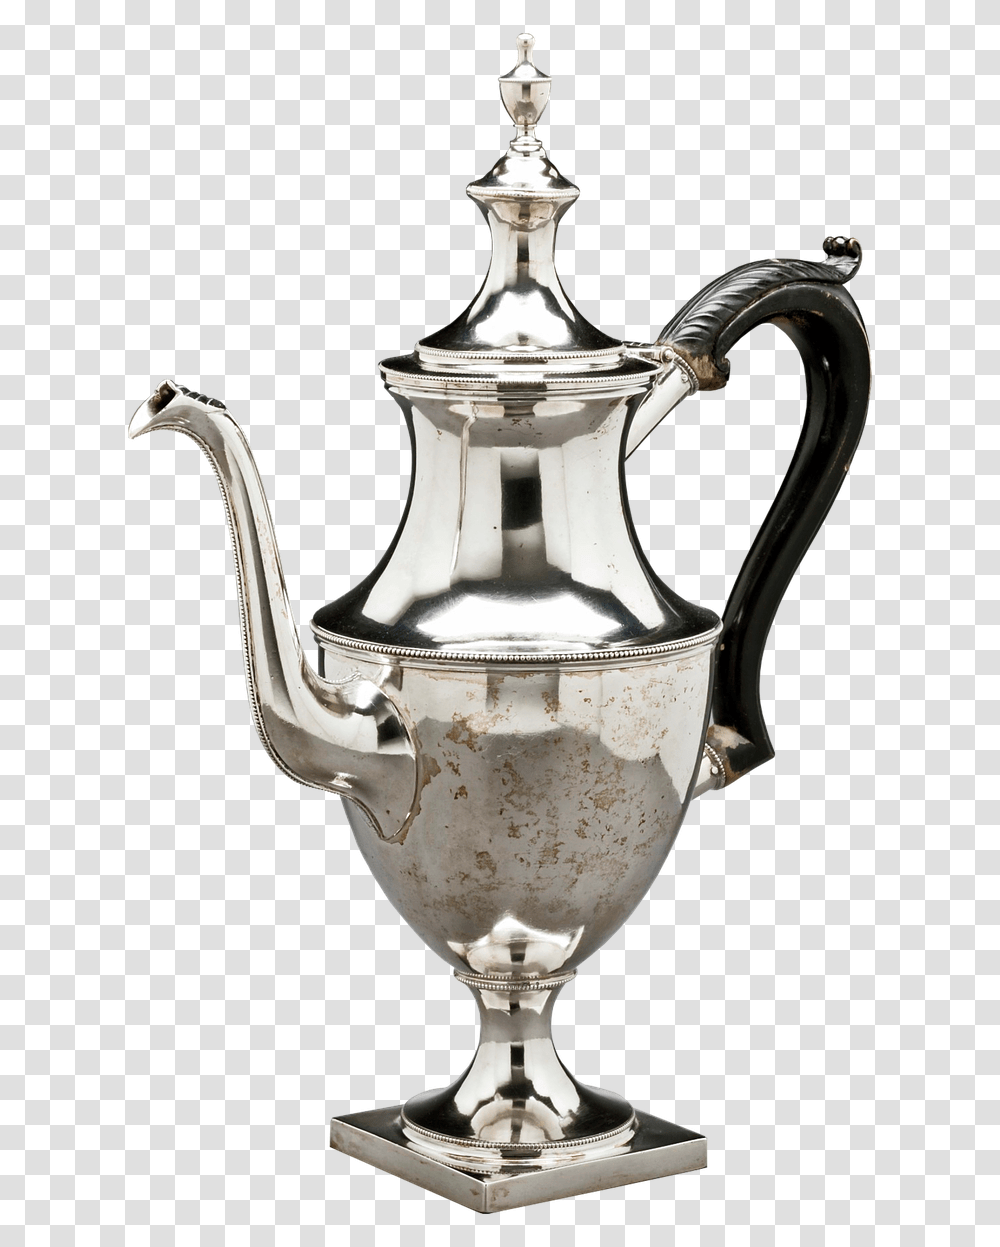 Silver Coffeepot Coffeepot Antique Silverware Coffee Pot, Pottery, Lamp, Teapot, Trophy Transparent Png